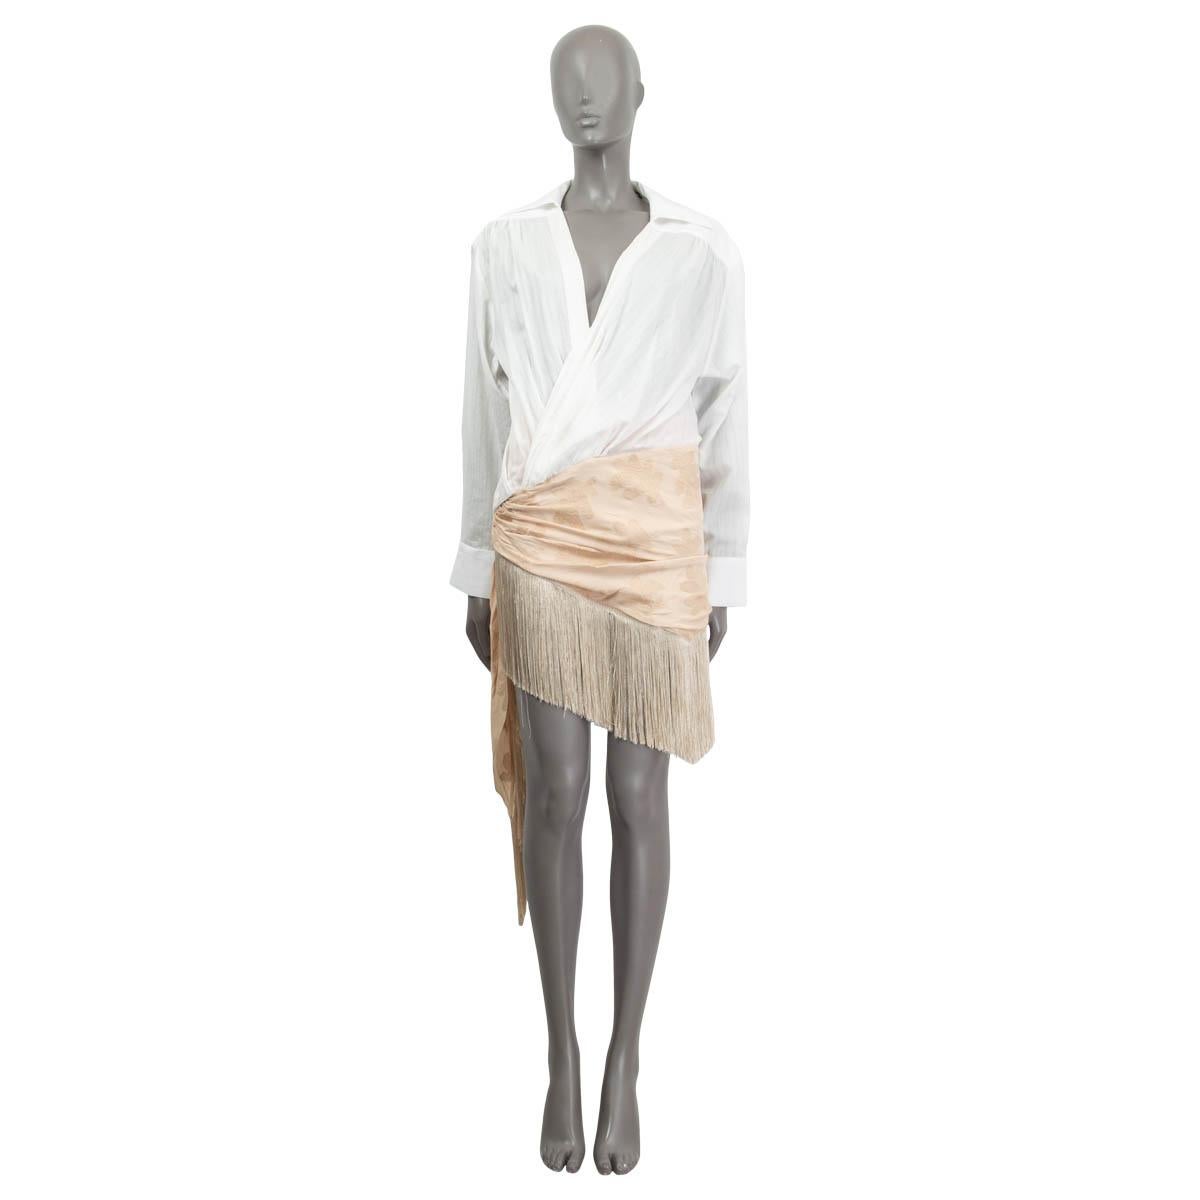 100% authentic Jacquemus 'La Bomba - La Robe Pareo' mini shirt dress in white and dusty rose viscose (100%). Comes with a diagonal cut pareo skirt overlay and fringes at the hem. Opens with a concealed zipper on the side. Skirt lined in dusty rose